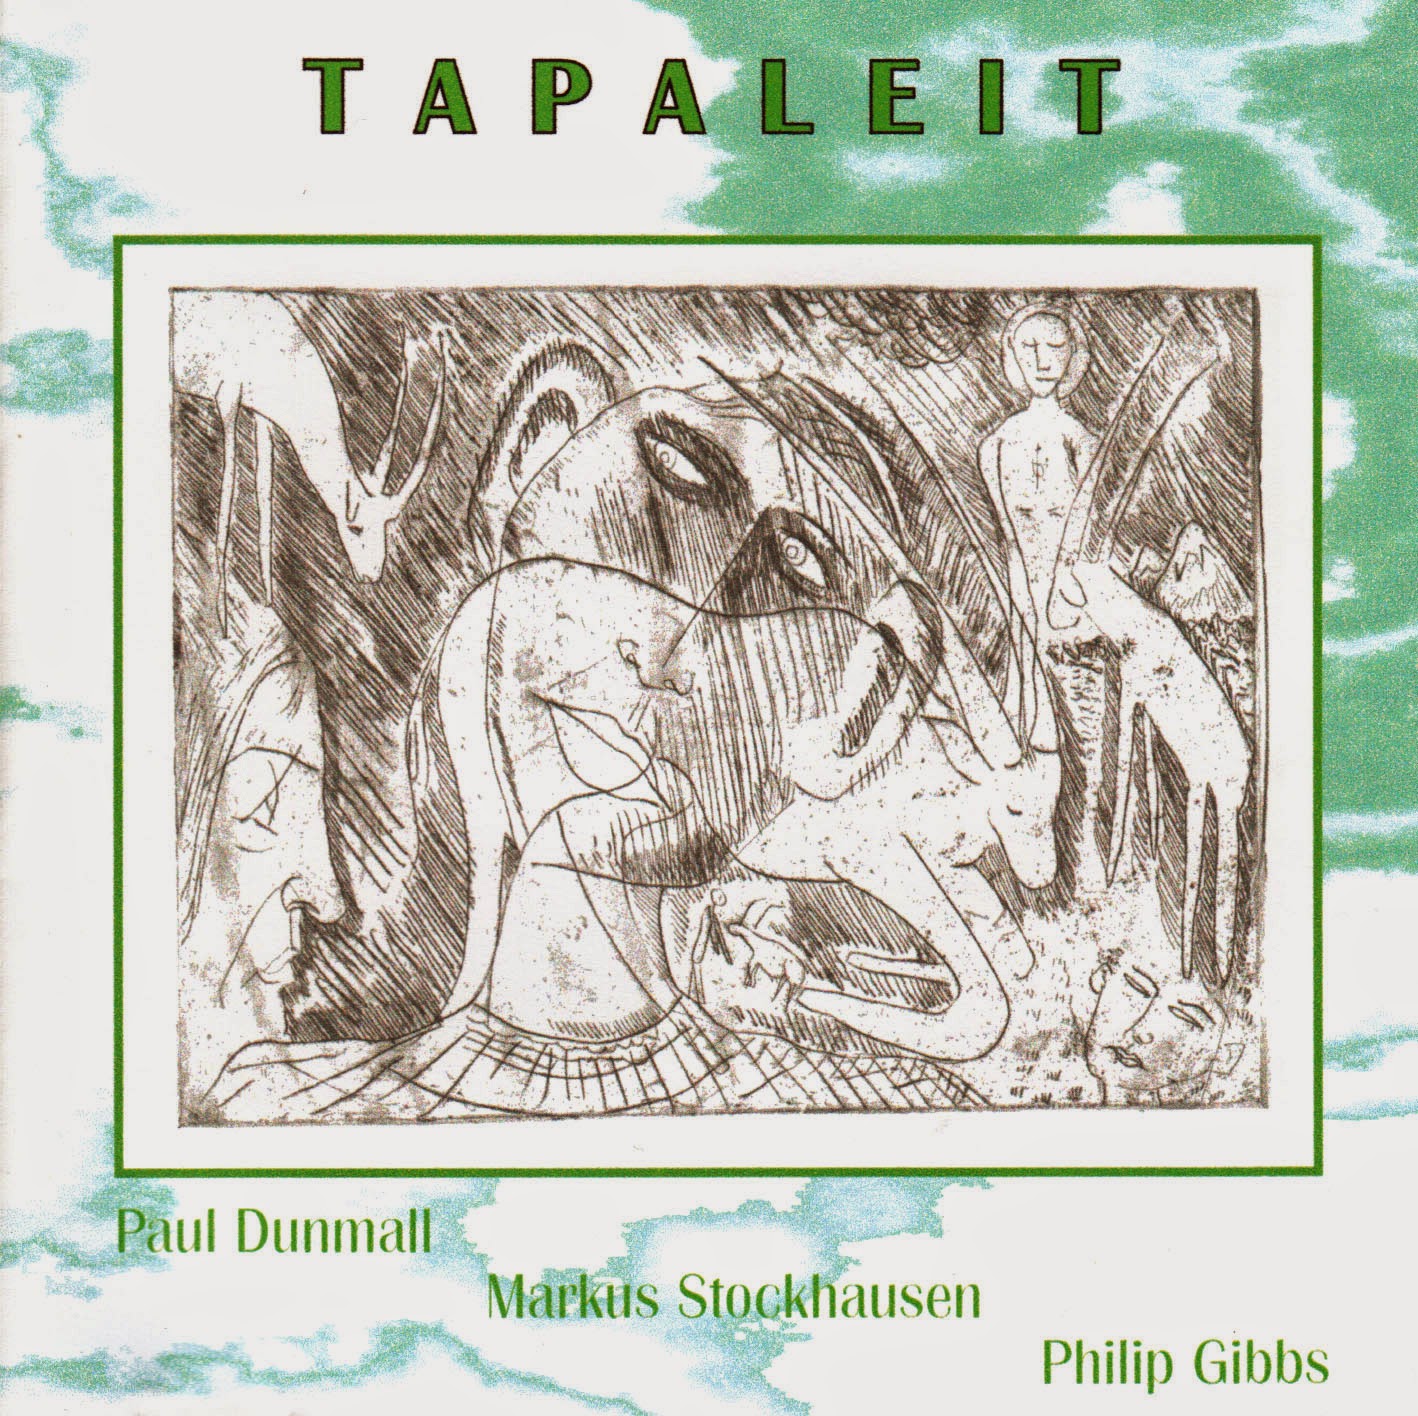 PAUL DUNMALL - Tapaleit cover 